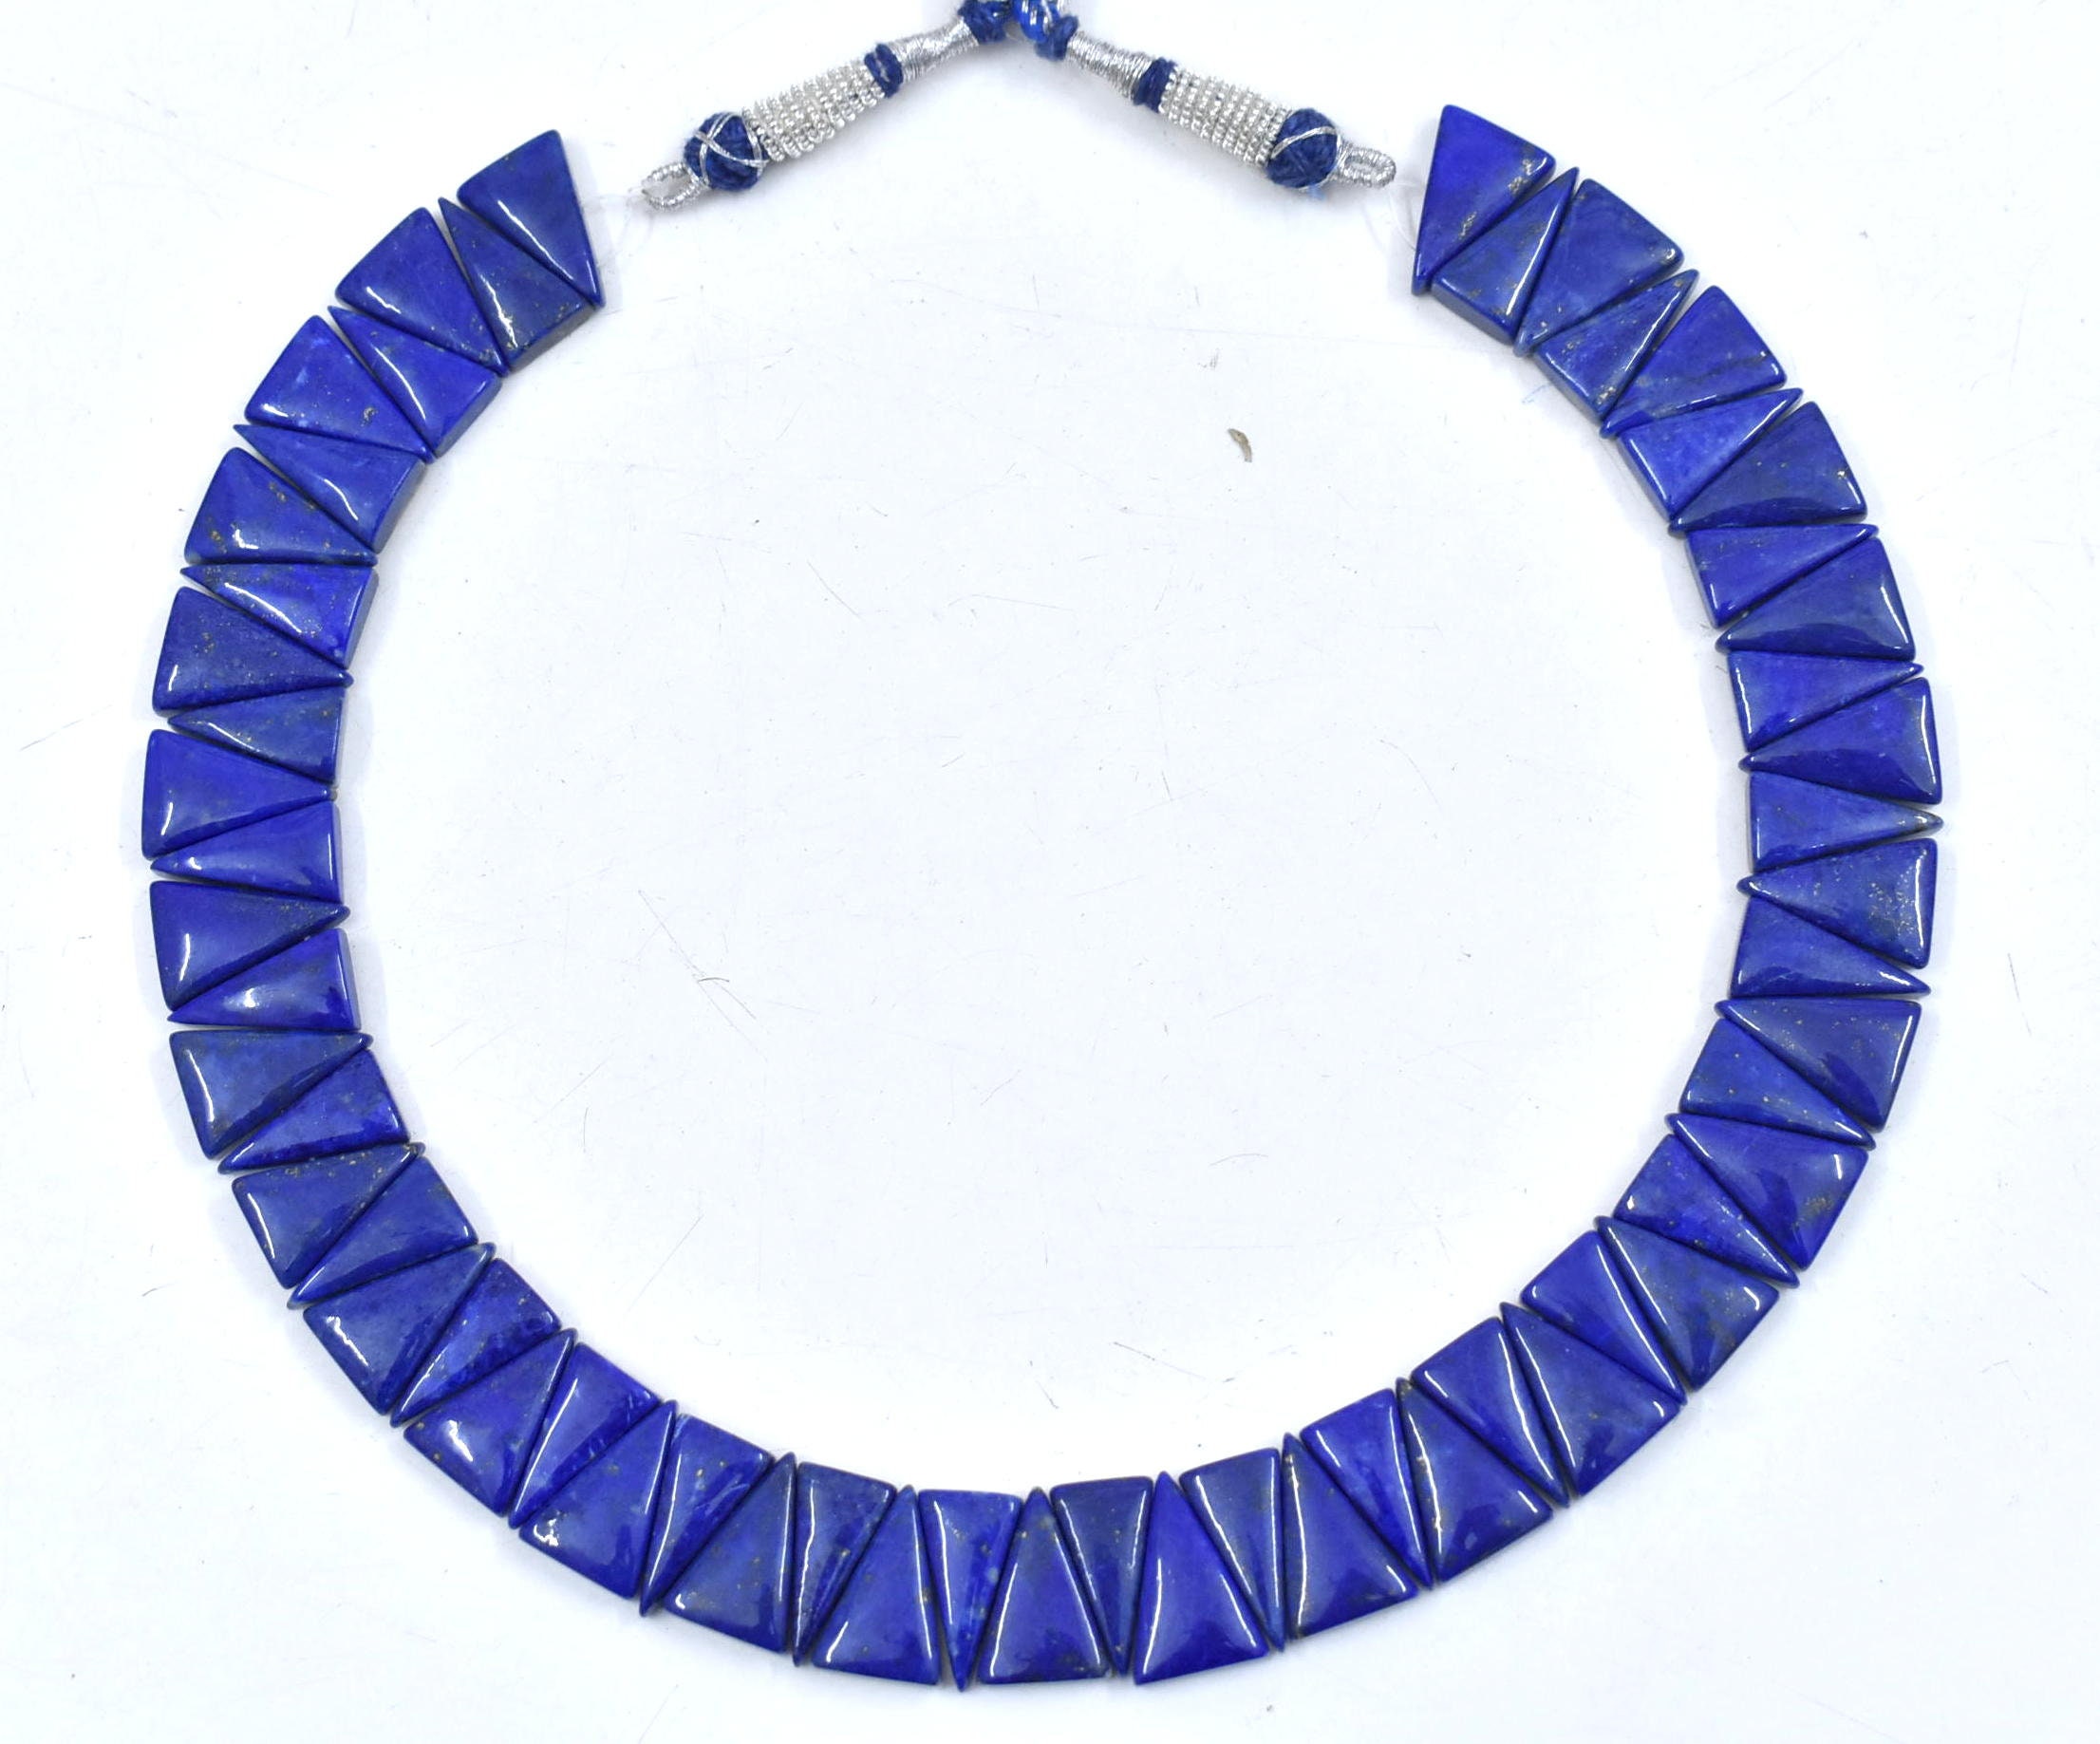 100% Natural lapis lazuli Afghanistan Mines,Blue stone Necklace,Handmade Necklace,Handicraft Necklace,Valentine,s Day Gift,Gift For Her. | Save 33% - Rajasthan Living 13